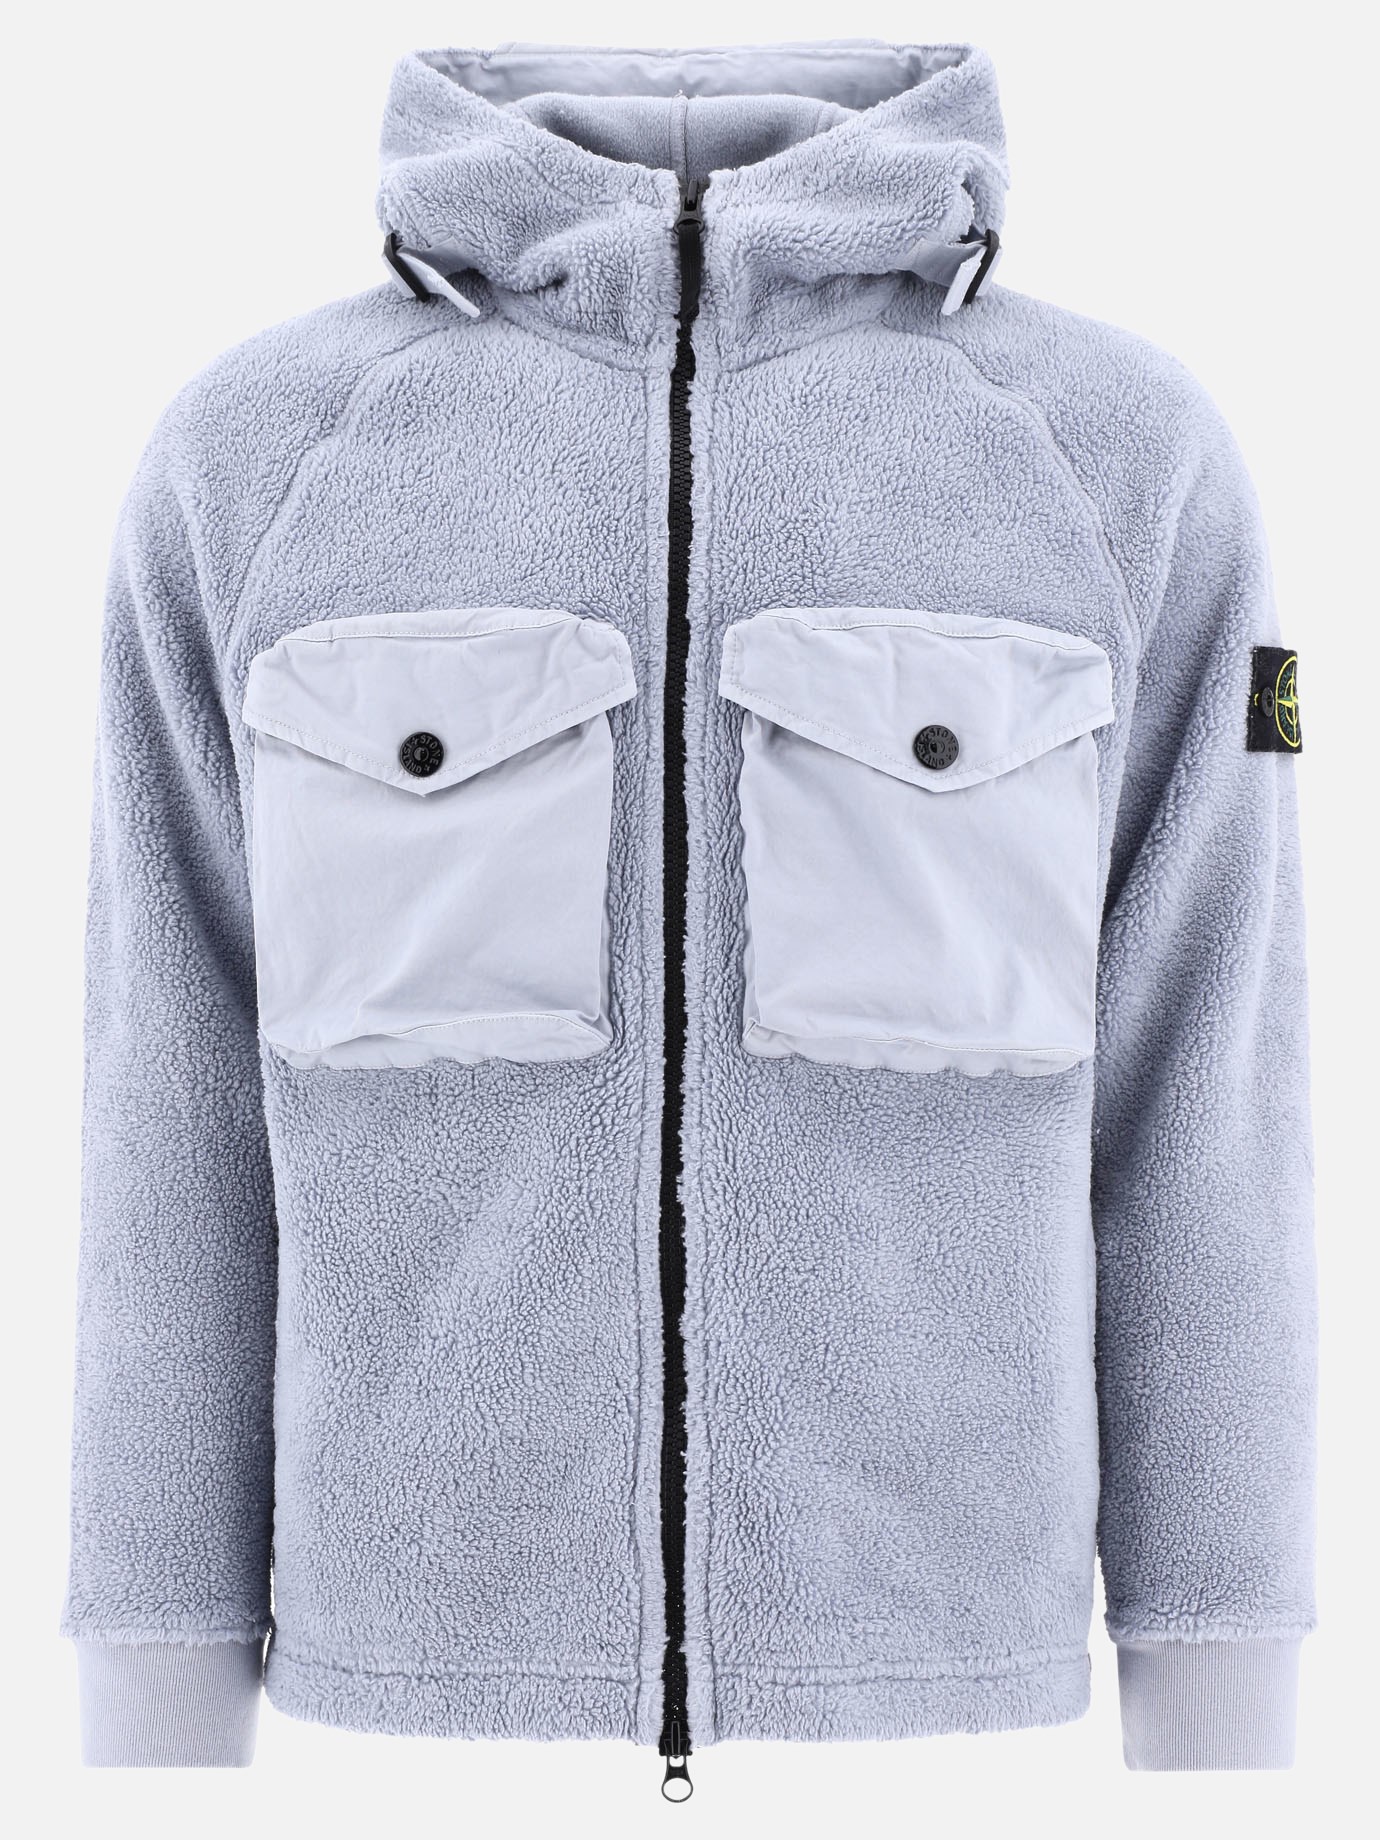  Compass  multipocket jacket by Stone Island